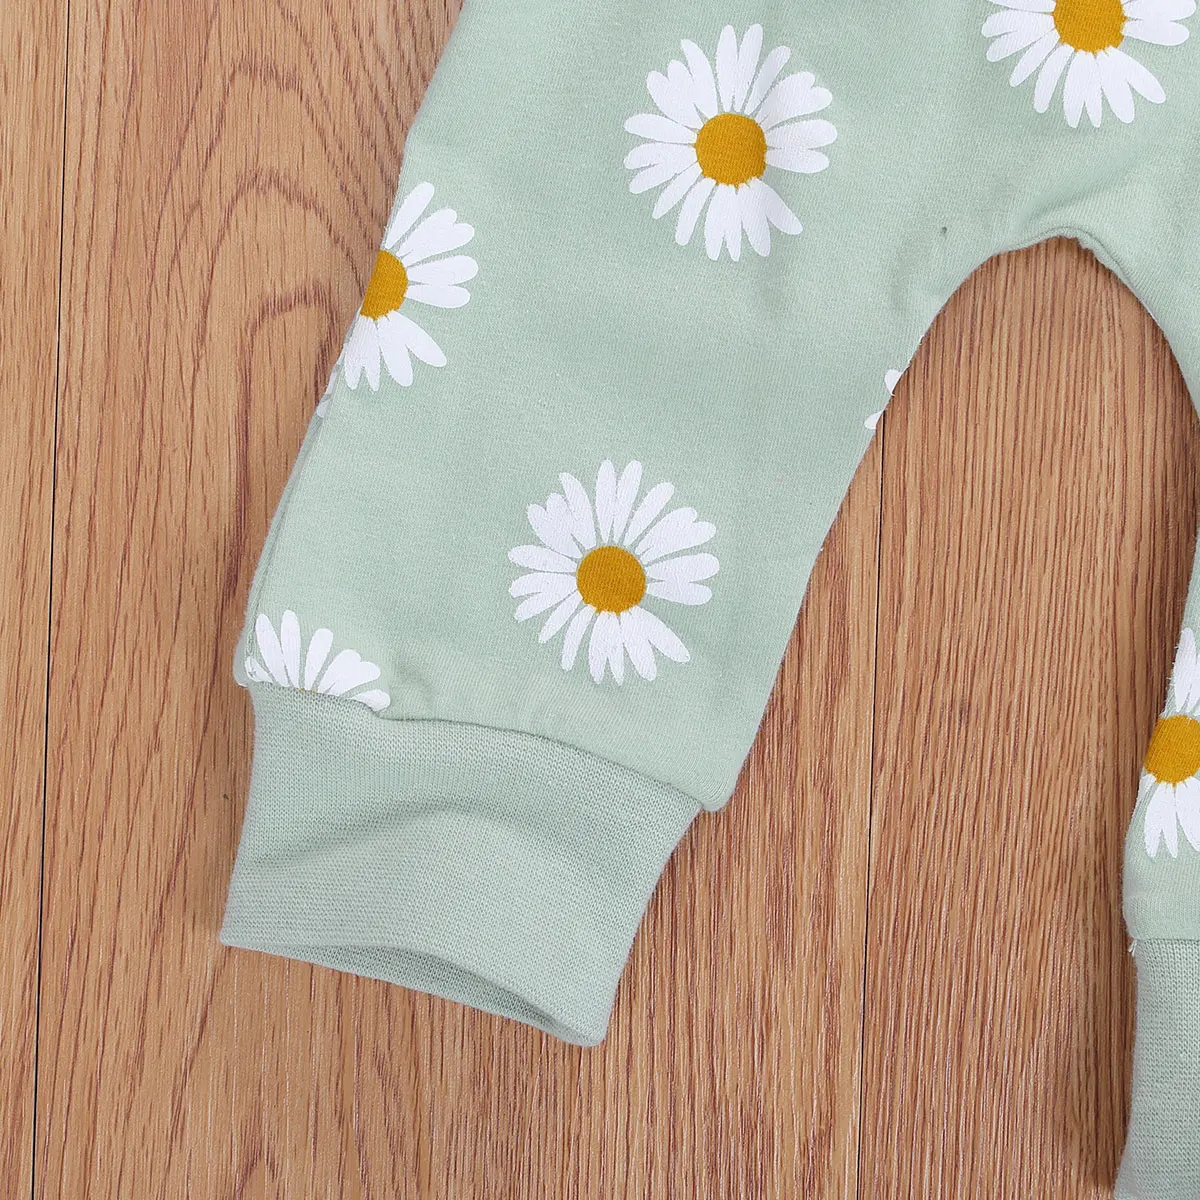 0-18M Newborn Infant Tracksuits Baby Girl Clothes 2pcs Daisy Print Long Sleeve Sweatshirts Tops Pants Headband Autumn Outfits images - 6